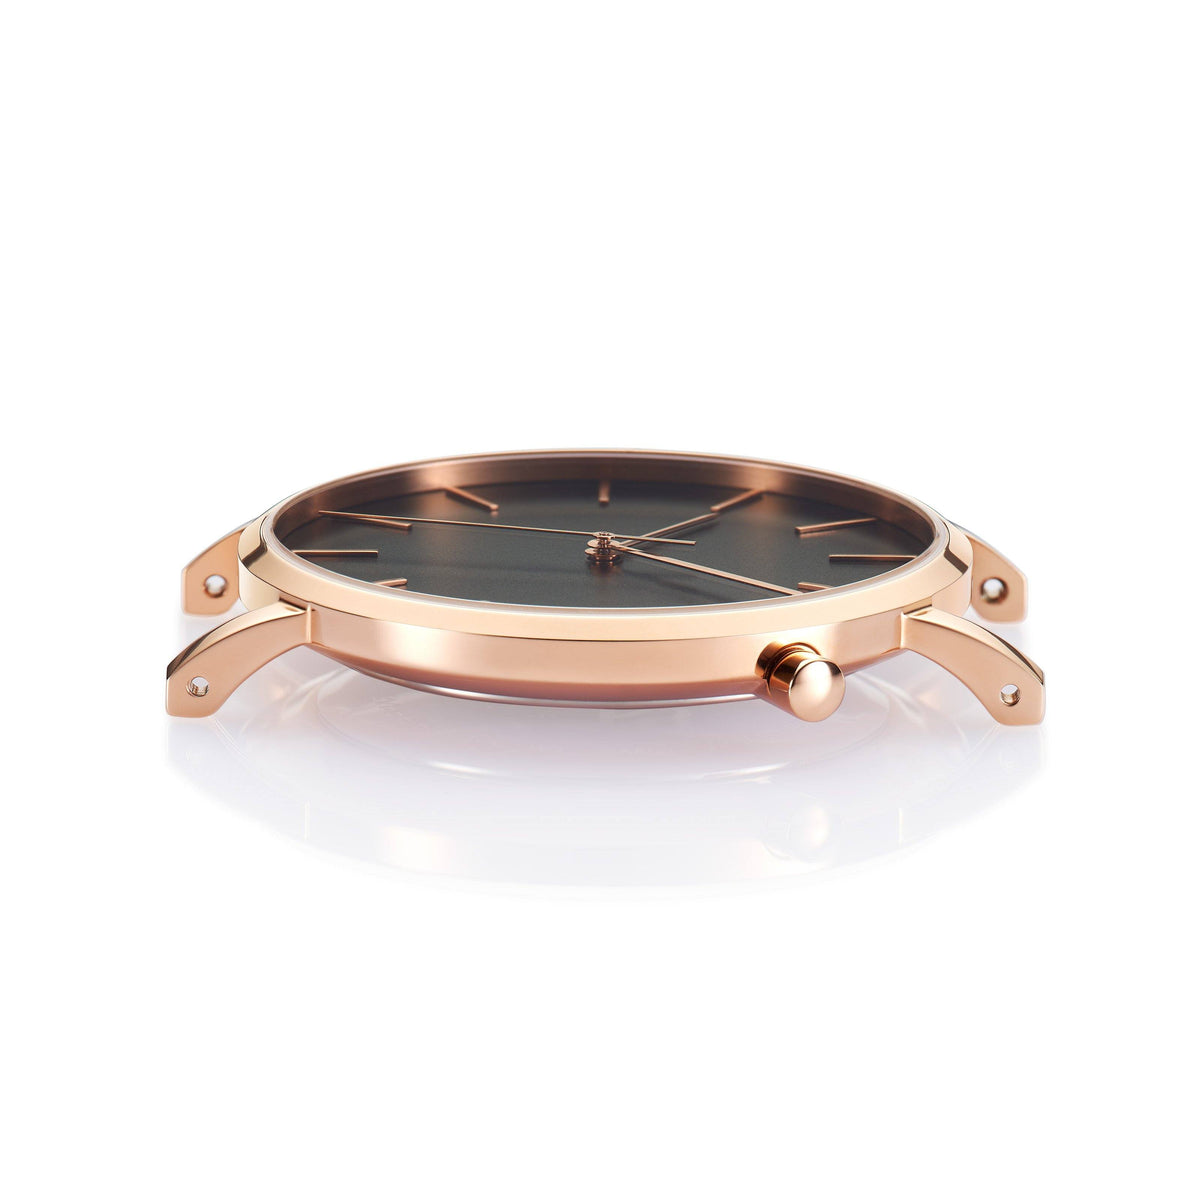 The Black and Rose Gold Watch - NATO